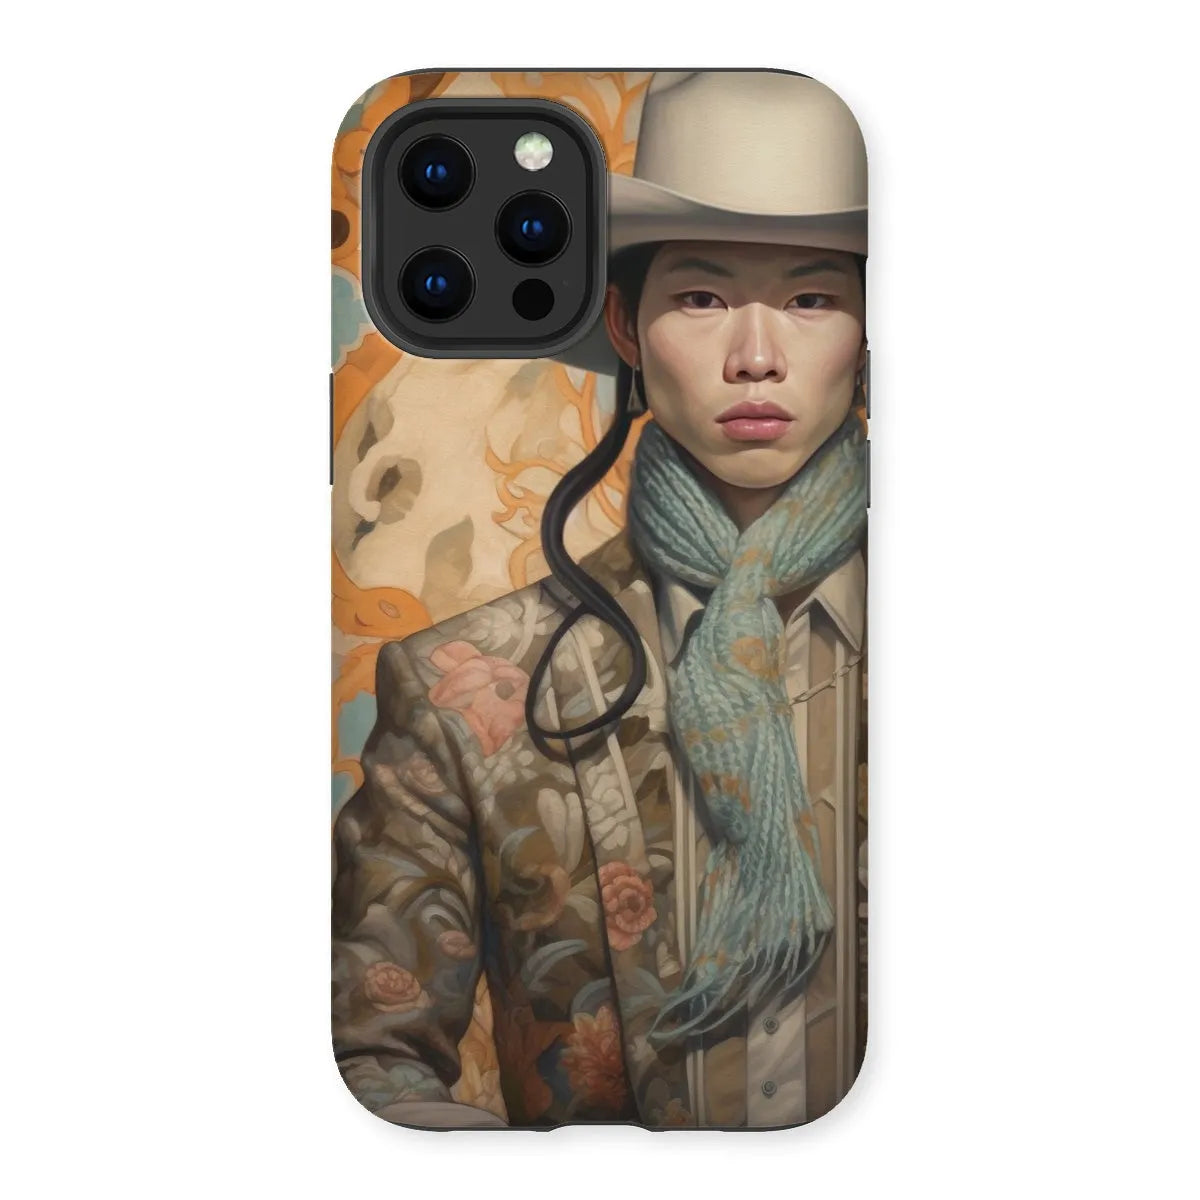 Baihu The Gay Cowboy - Gay Aesthetic Art Phone Case - Iphone 13 Pro Max / Matte - Mobile Phone Cases - Aesthetic Art